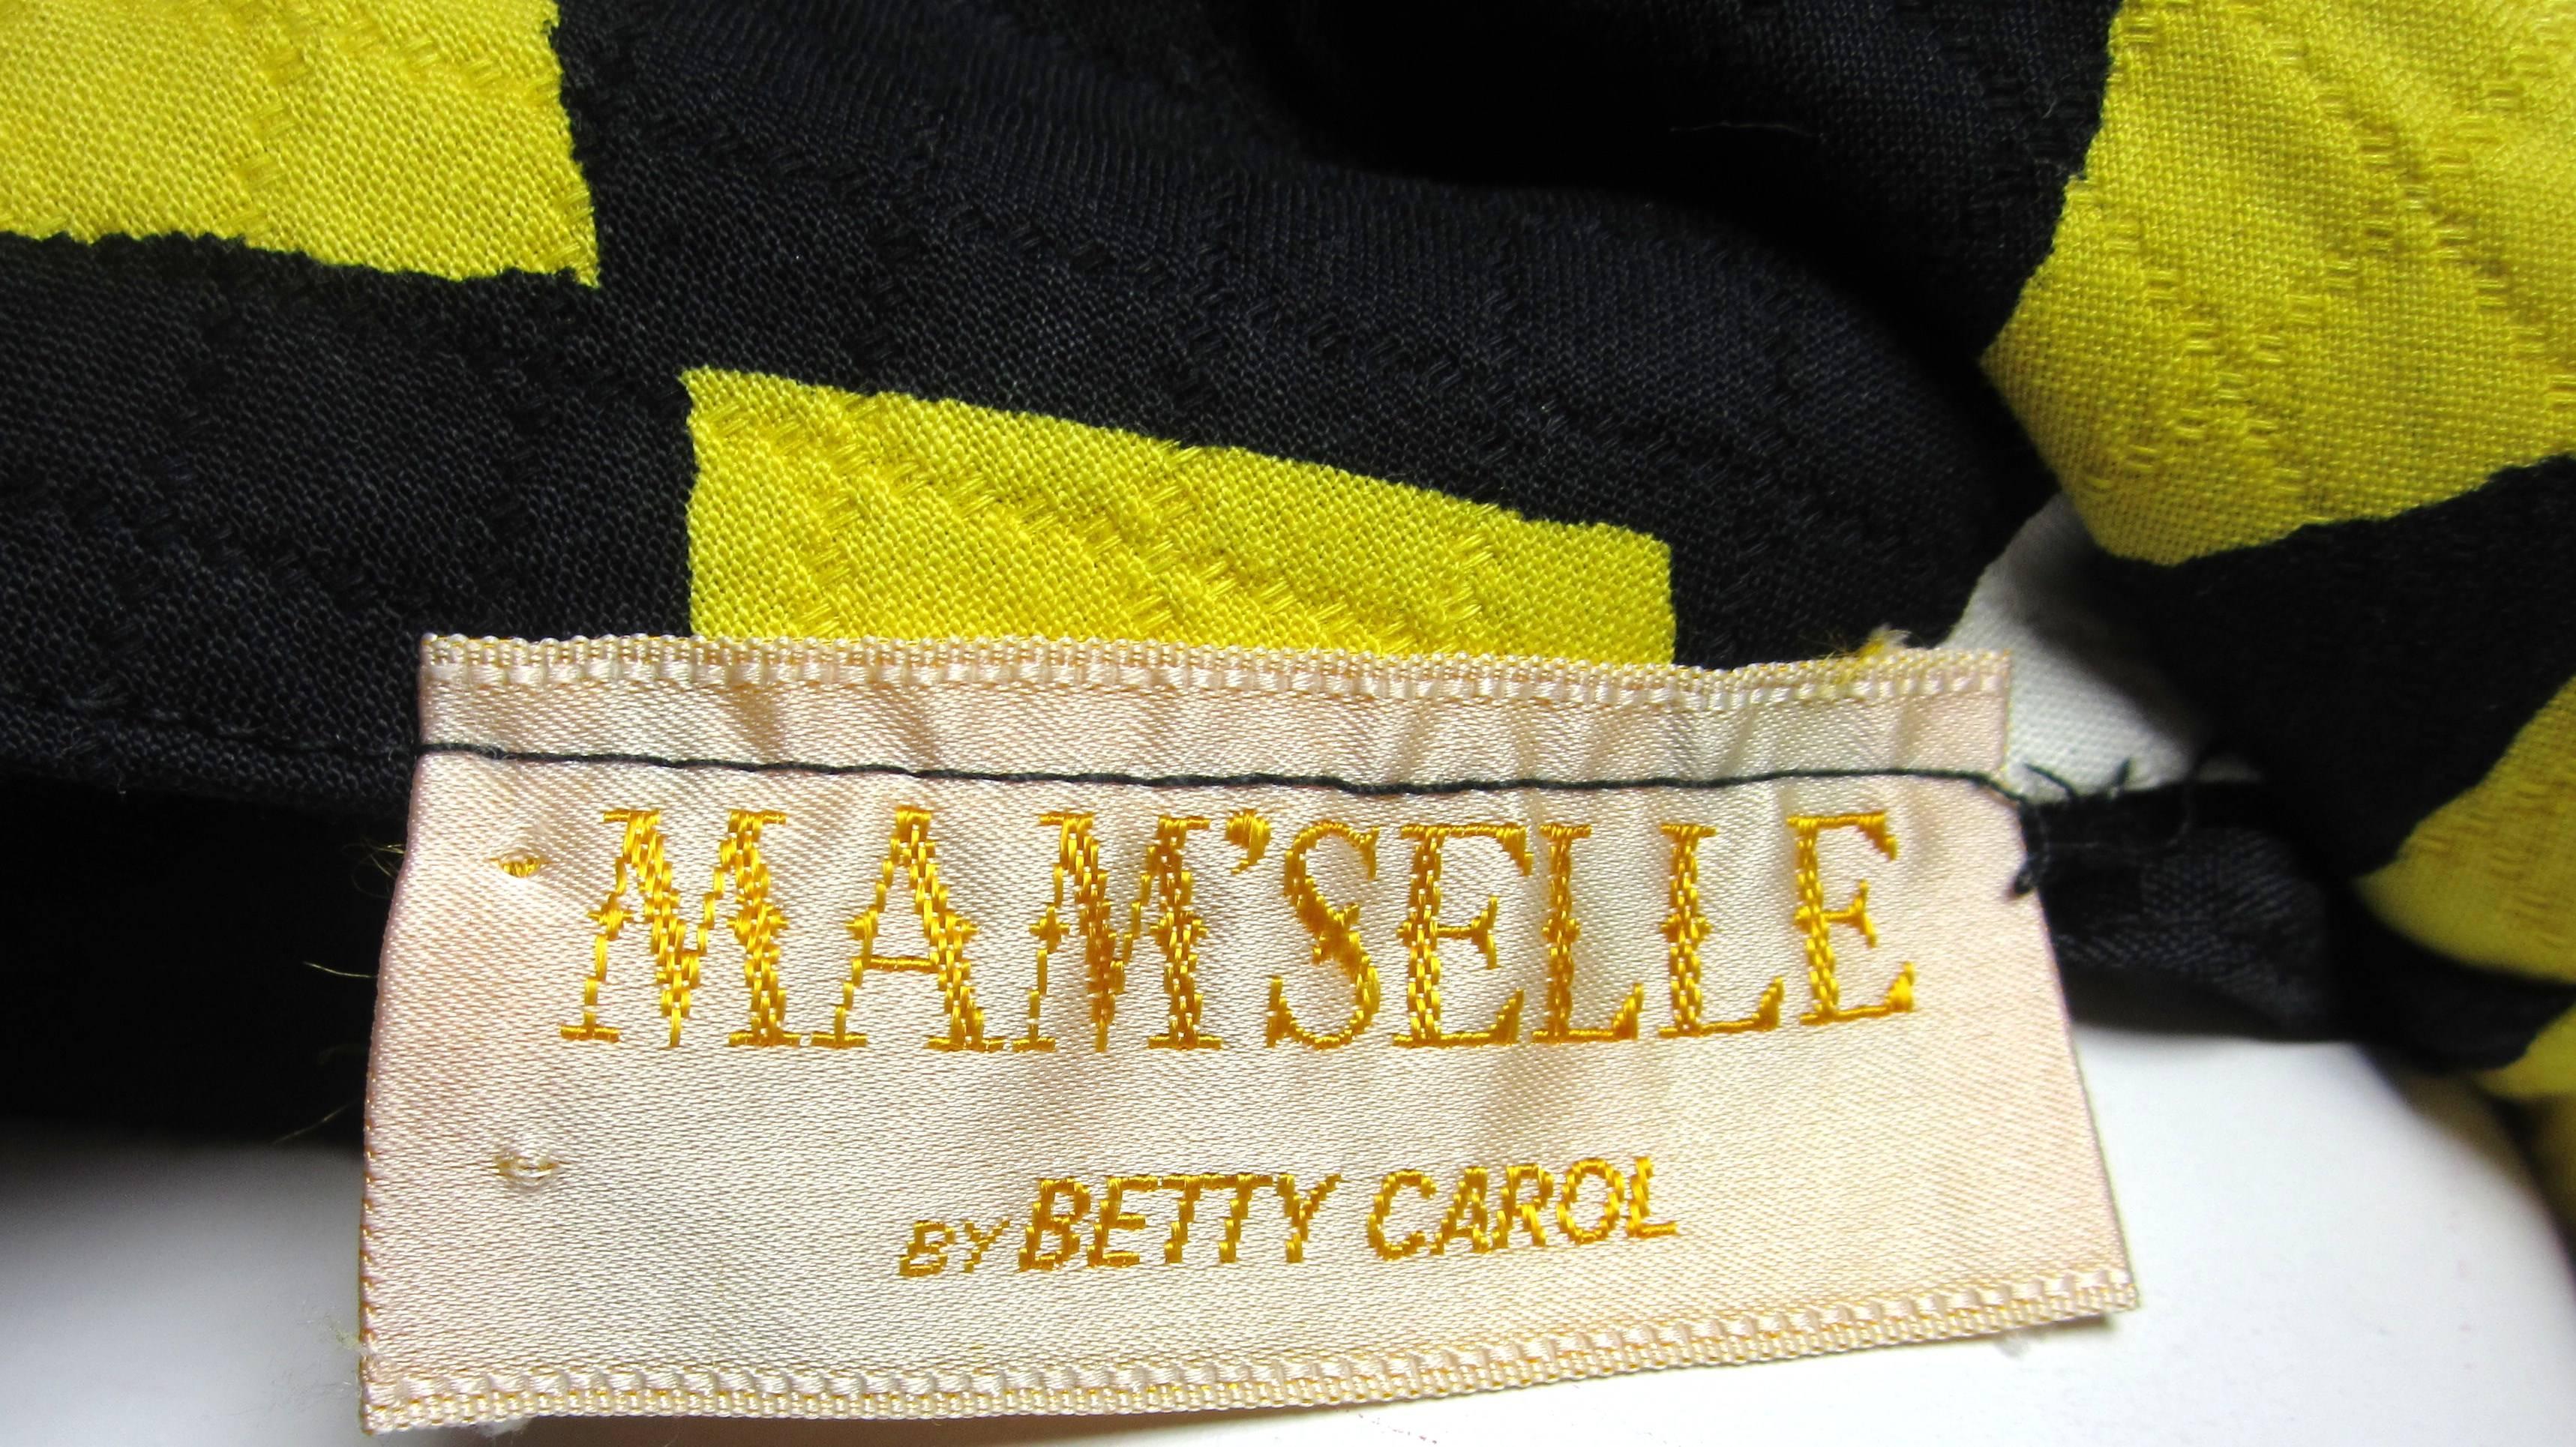  Mod Graphic Empire waist Yellow Black Midi Dress Mam'selle Betty Carol 1960s In Good Condition For Sale In Wallkill, NY